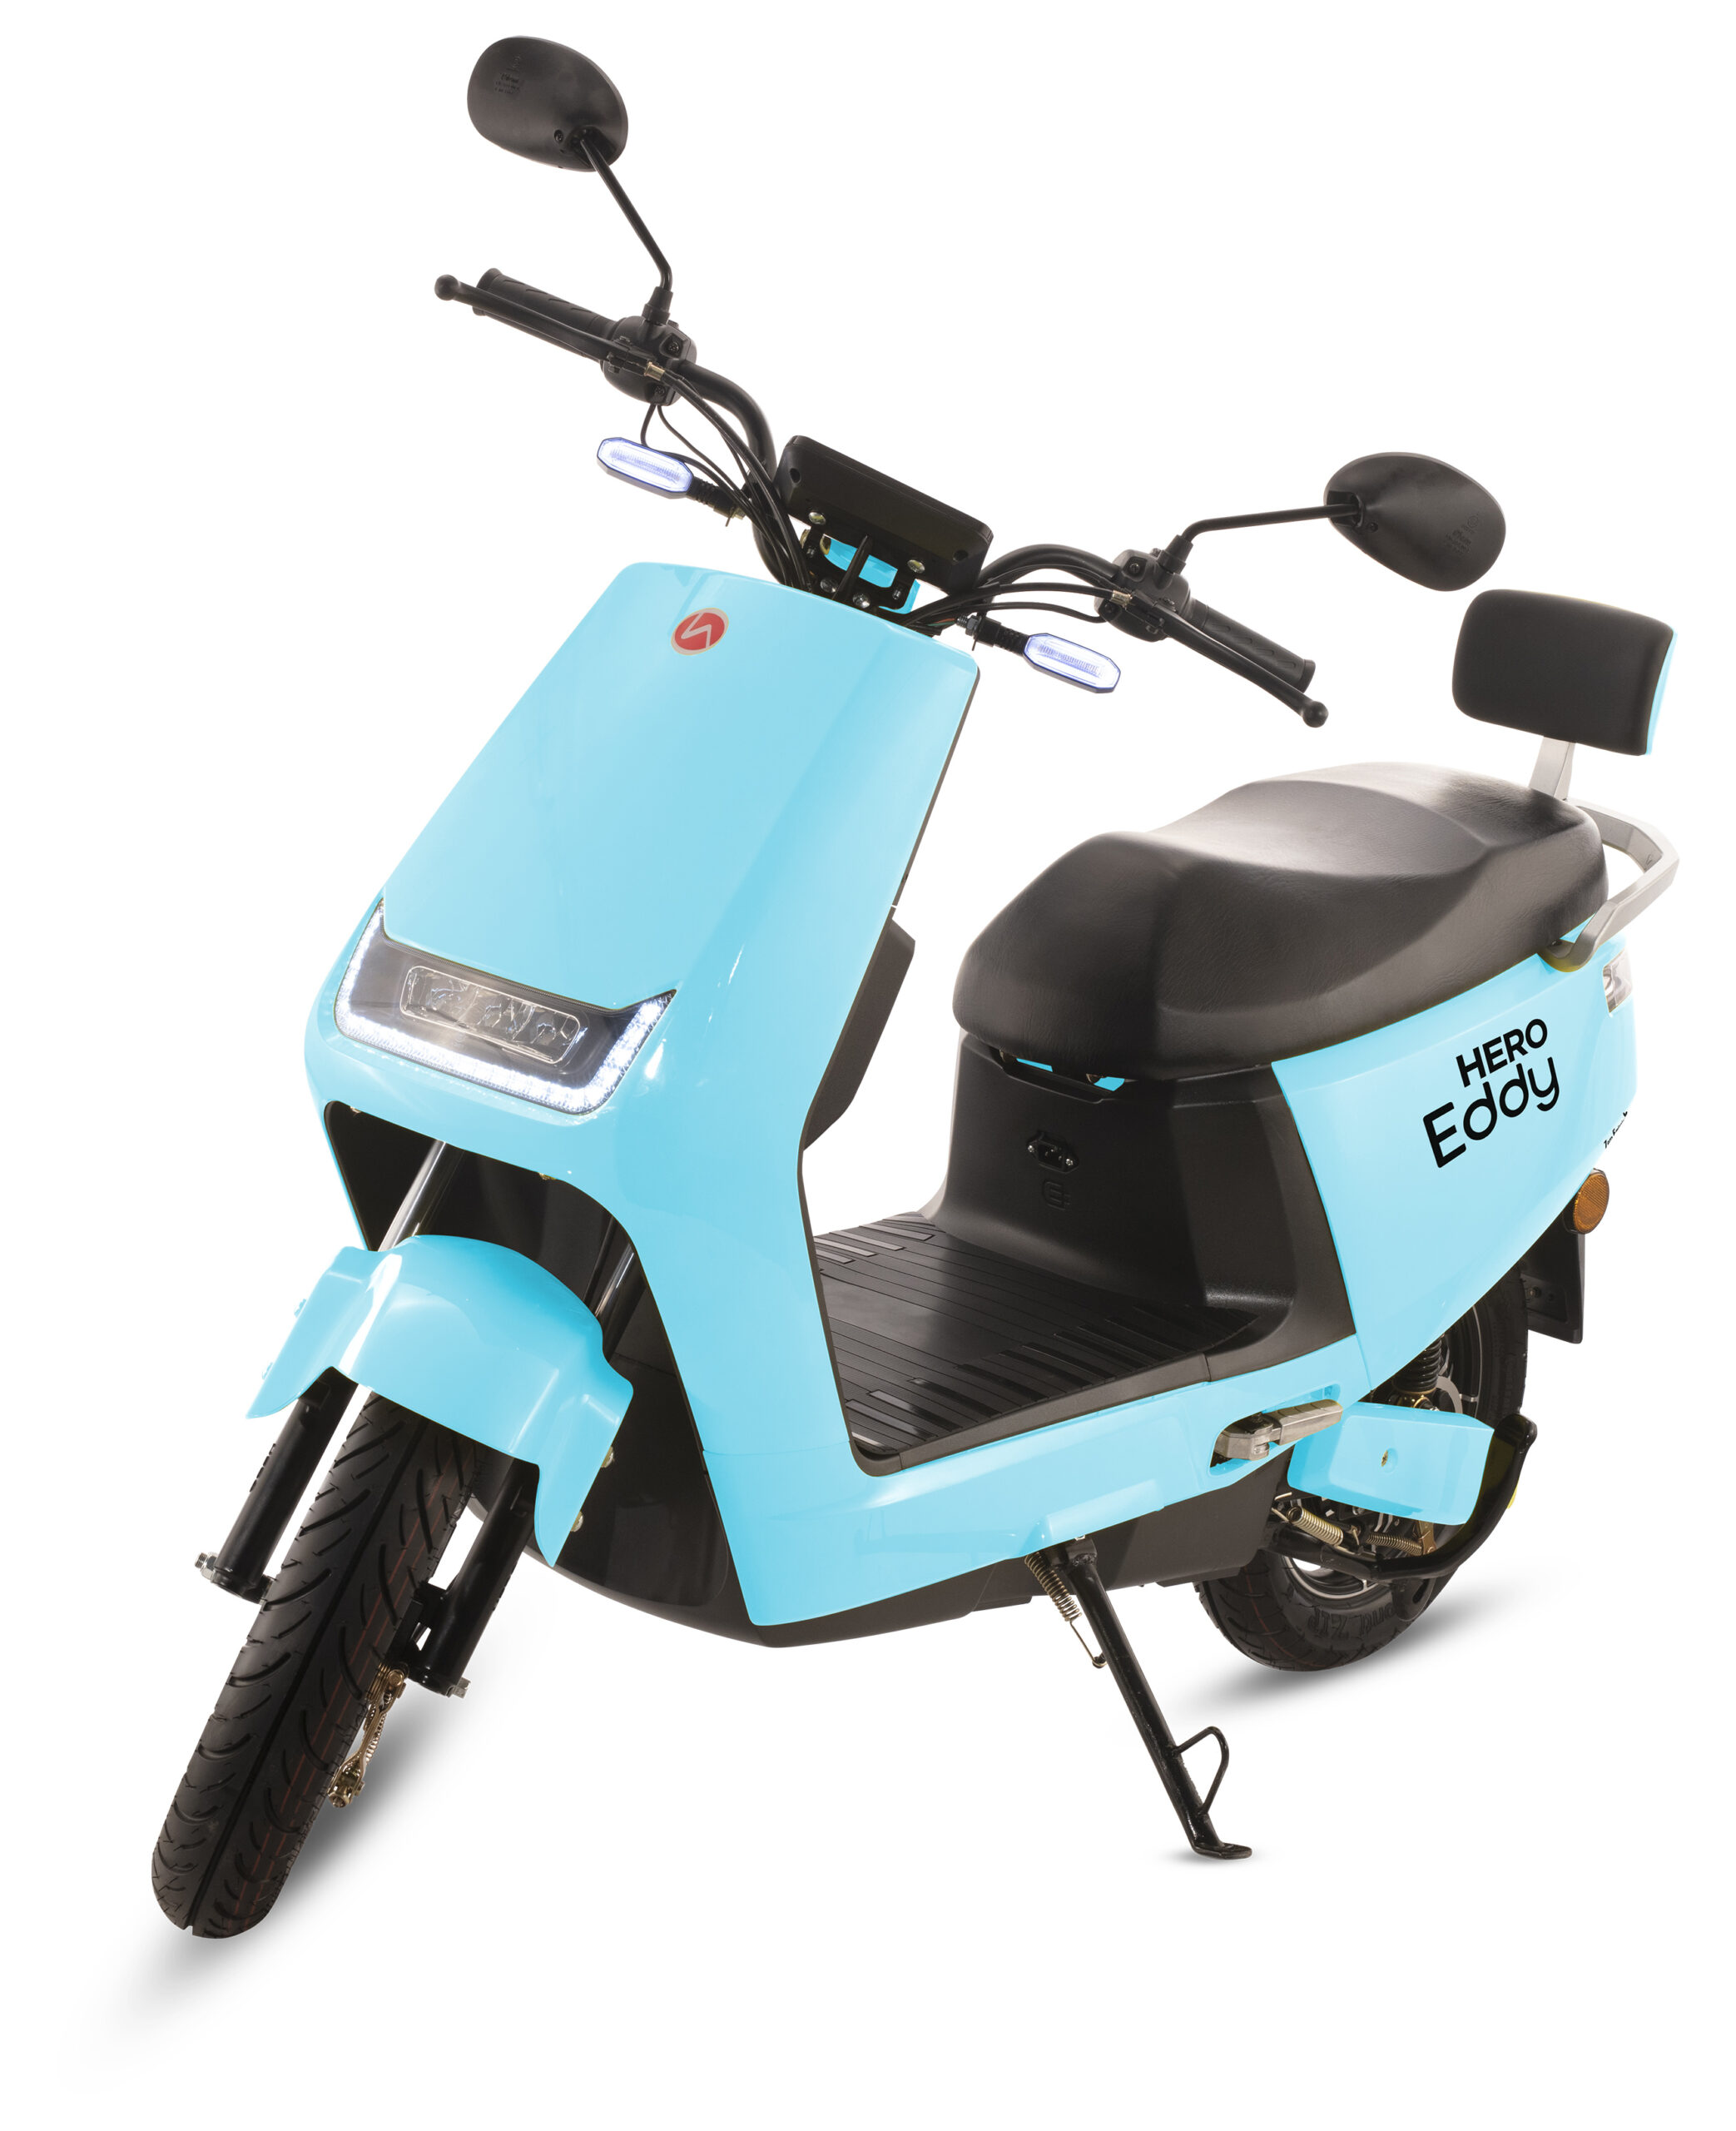 Hero Eddy Electric Scooter Launched In India!